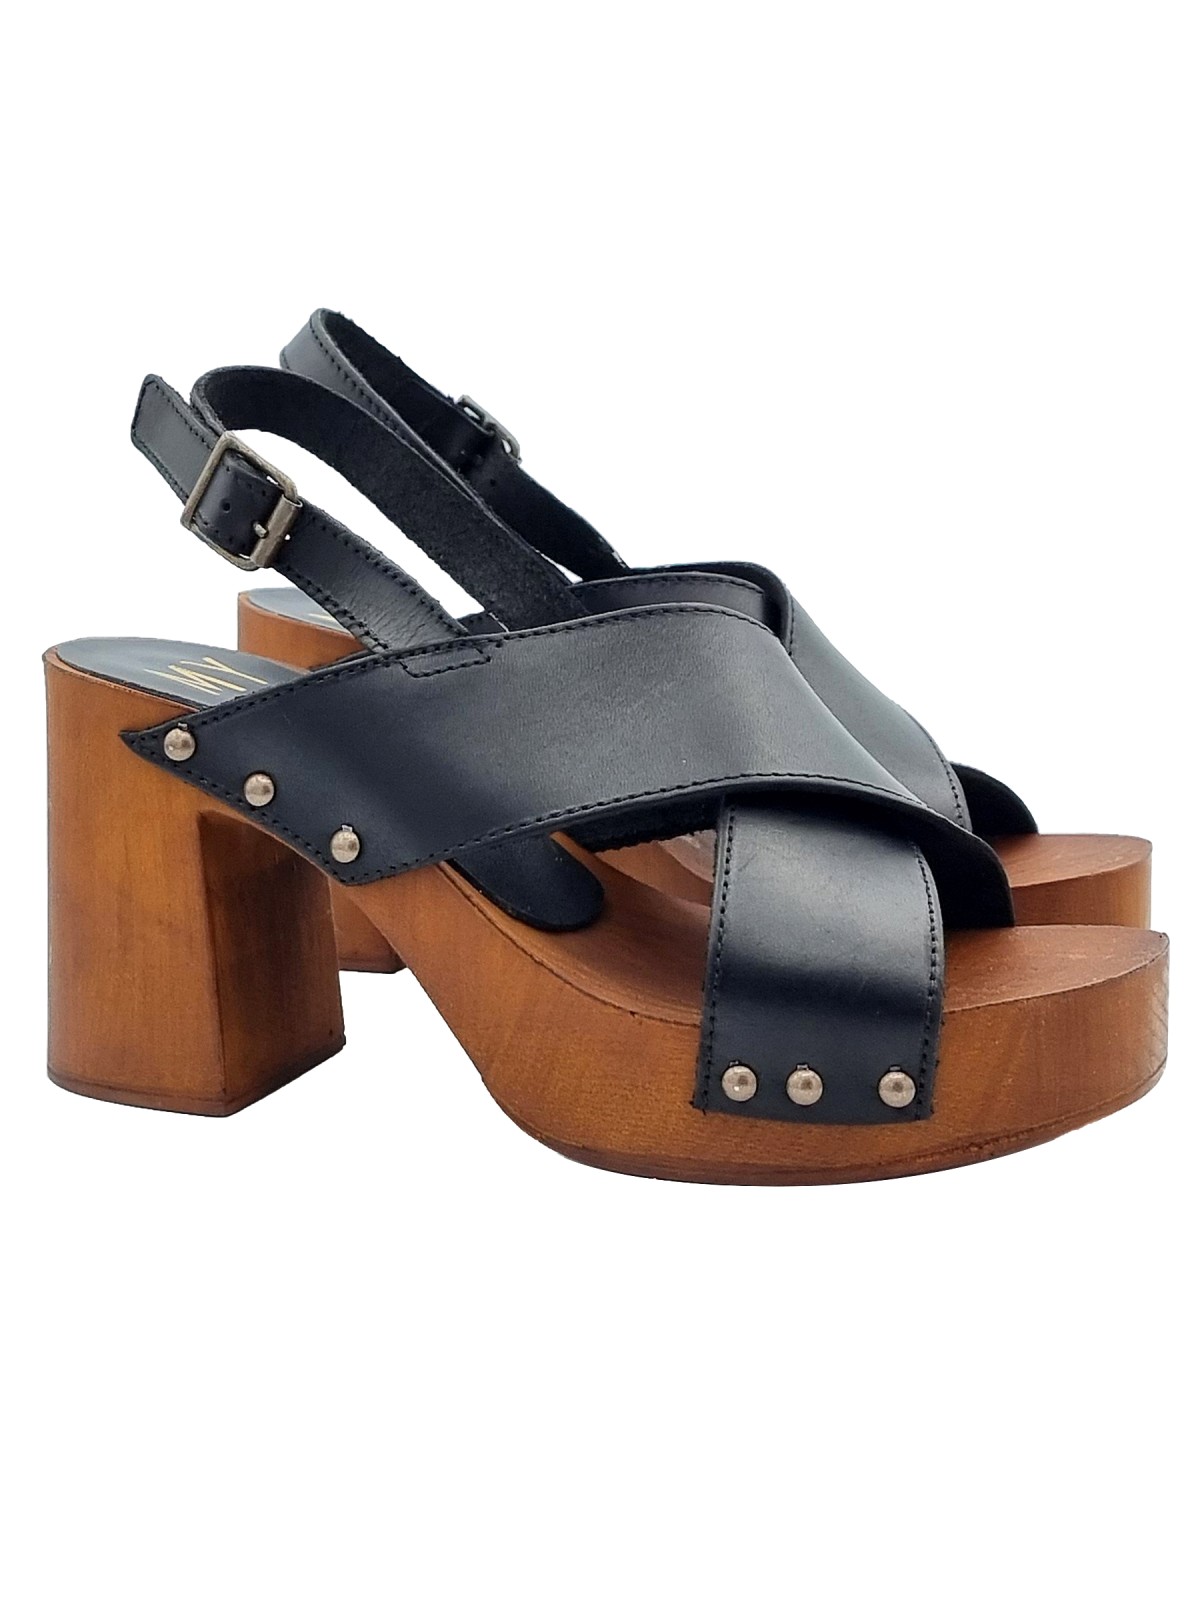 BLACK SANDALS WITH CROSSED BANDS AND HEEL 8,5